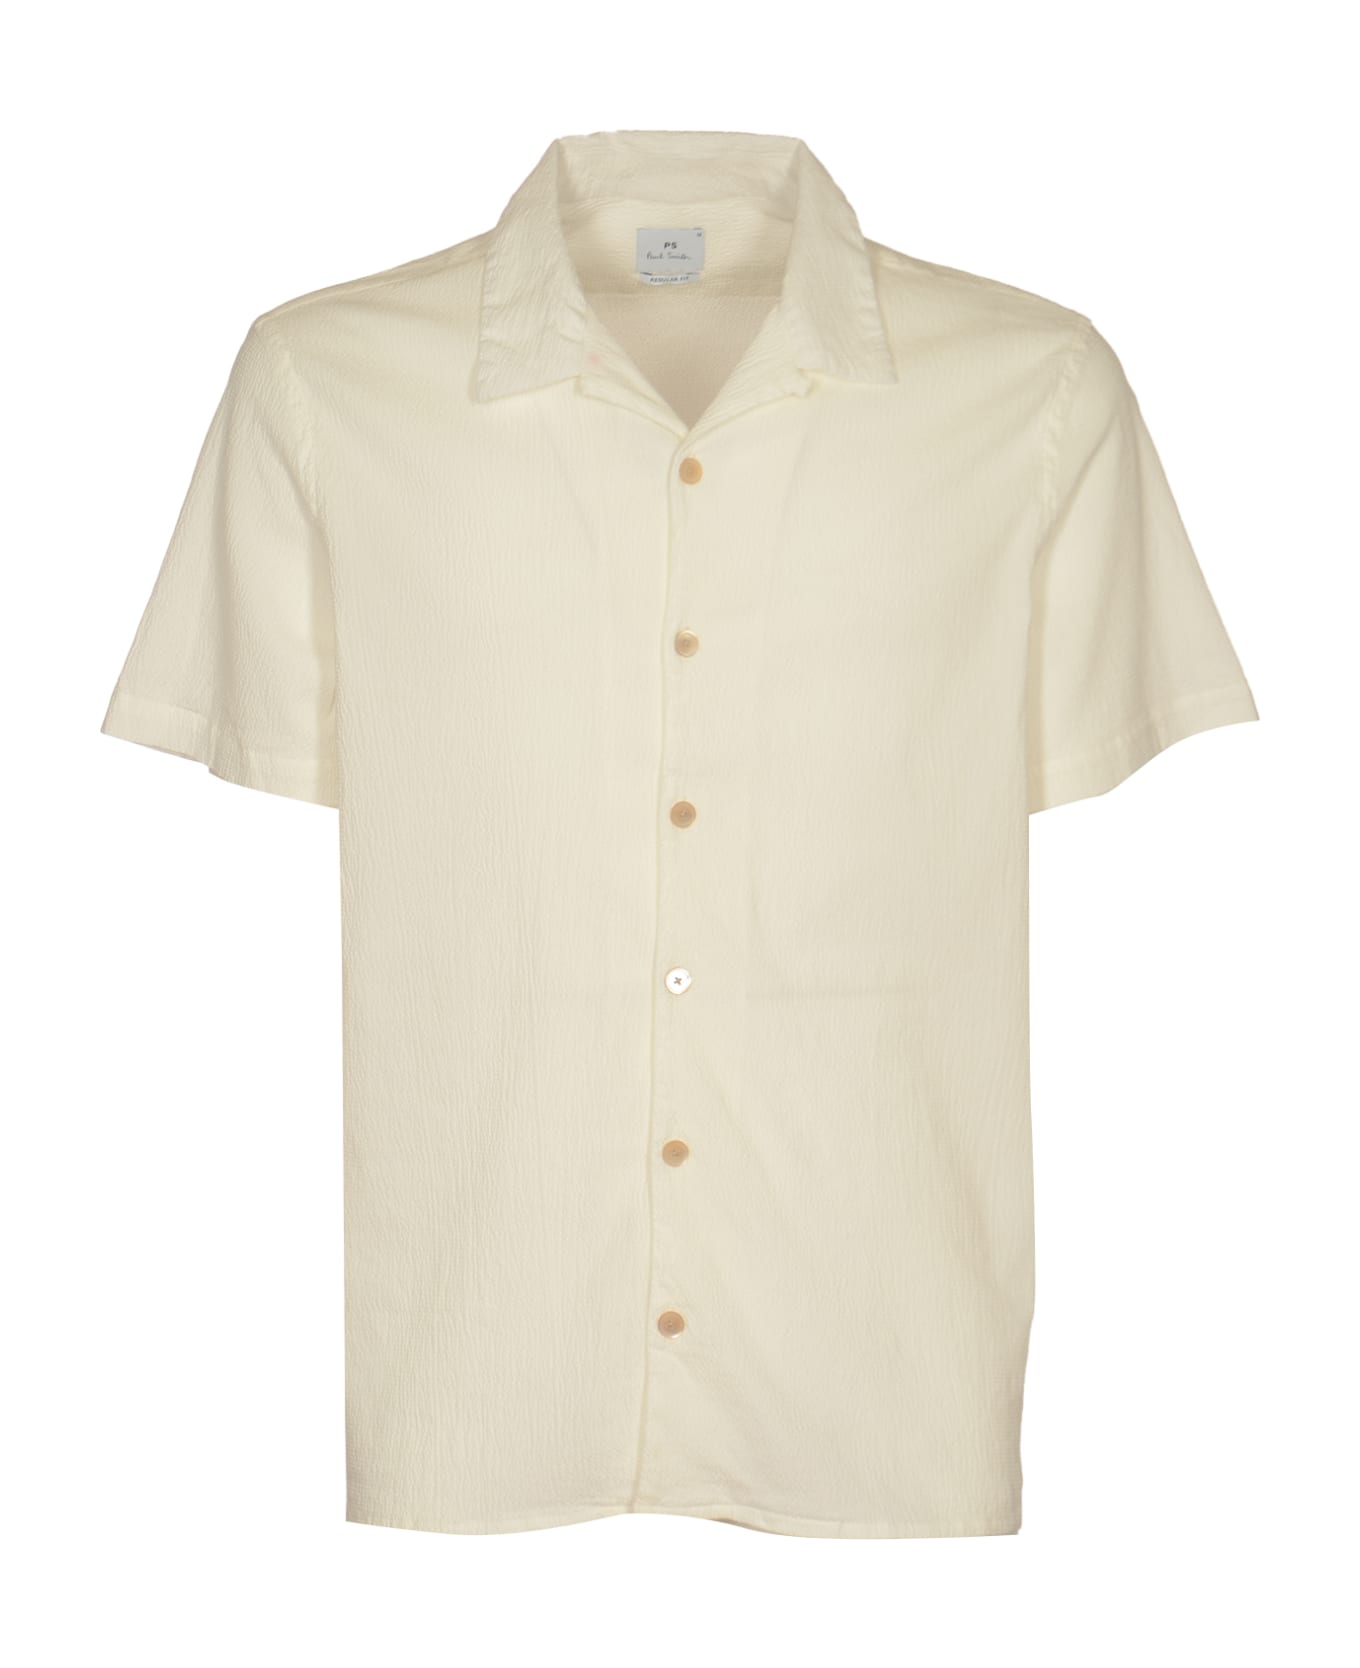 PS by Paul Smith Formal Plain Short-sleeved Shirt - Off White シャツ